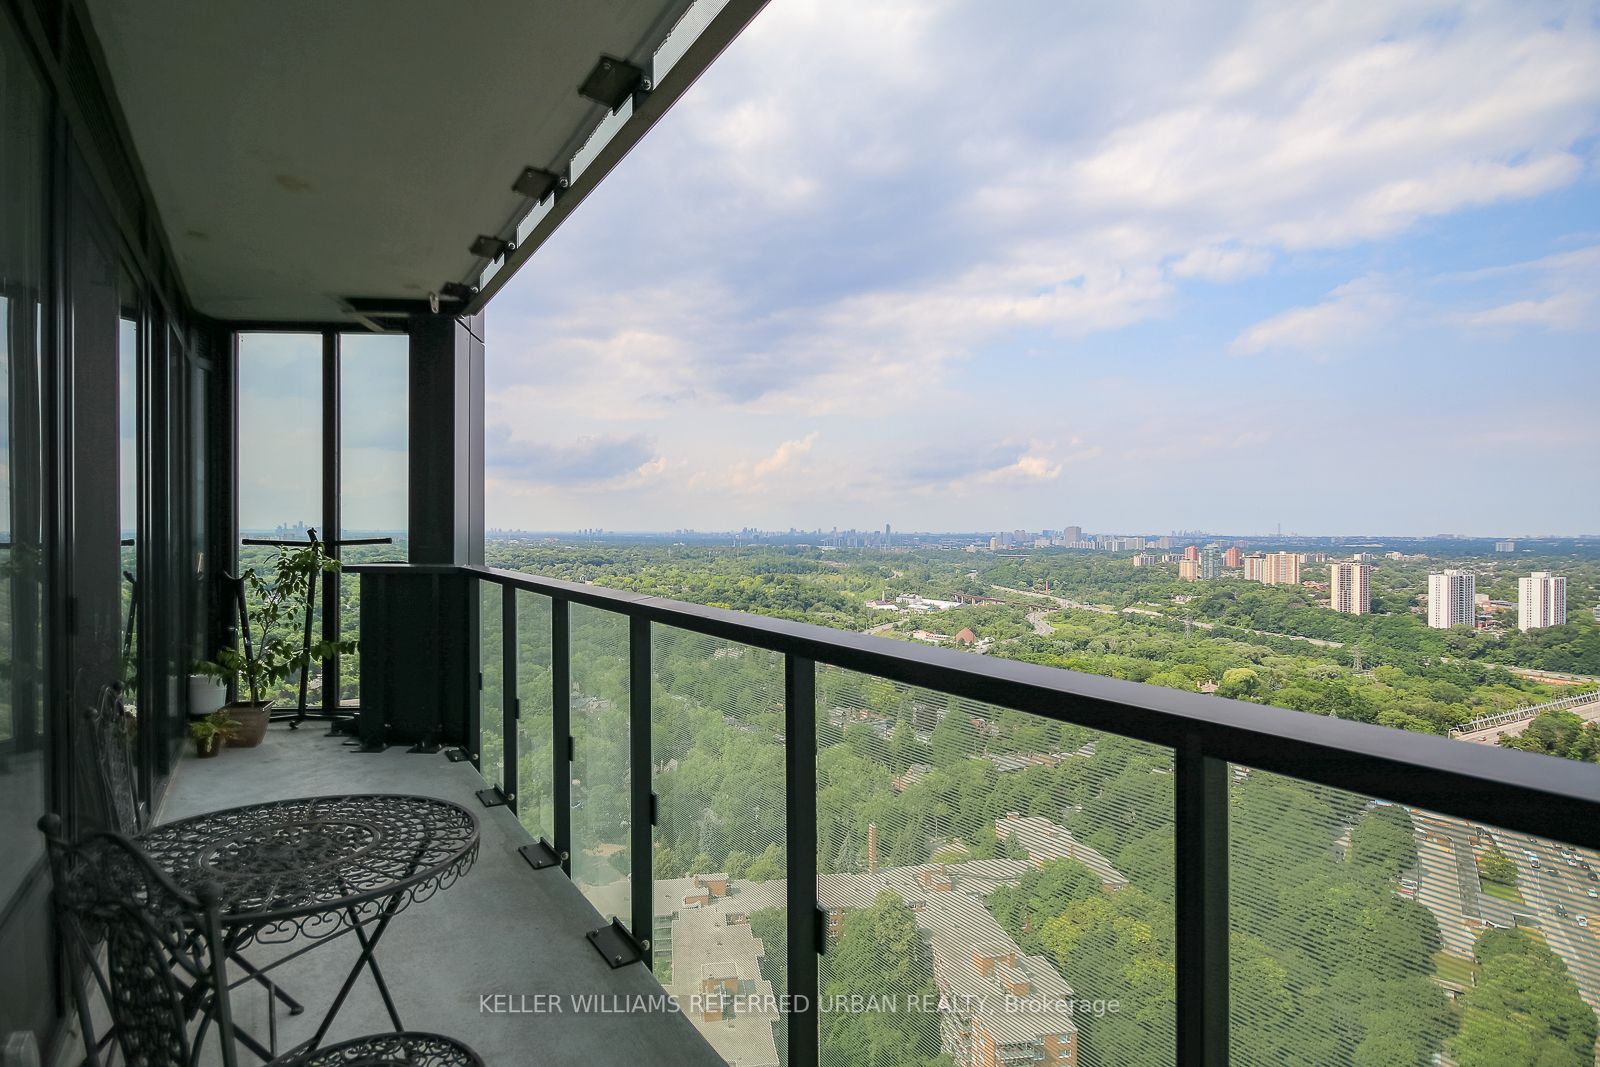 I have sold a property at 3503 575 Bloor ST E in Toronto
